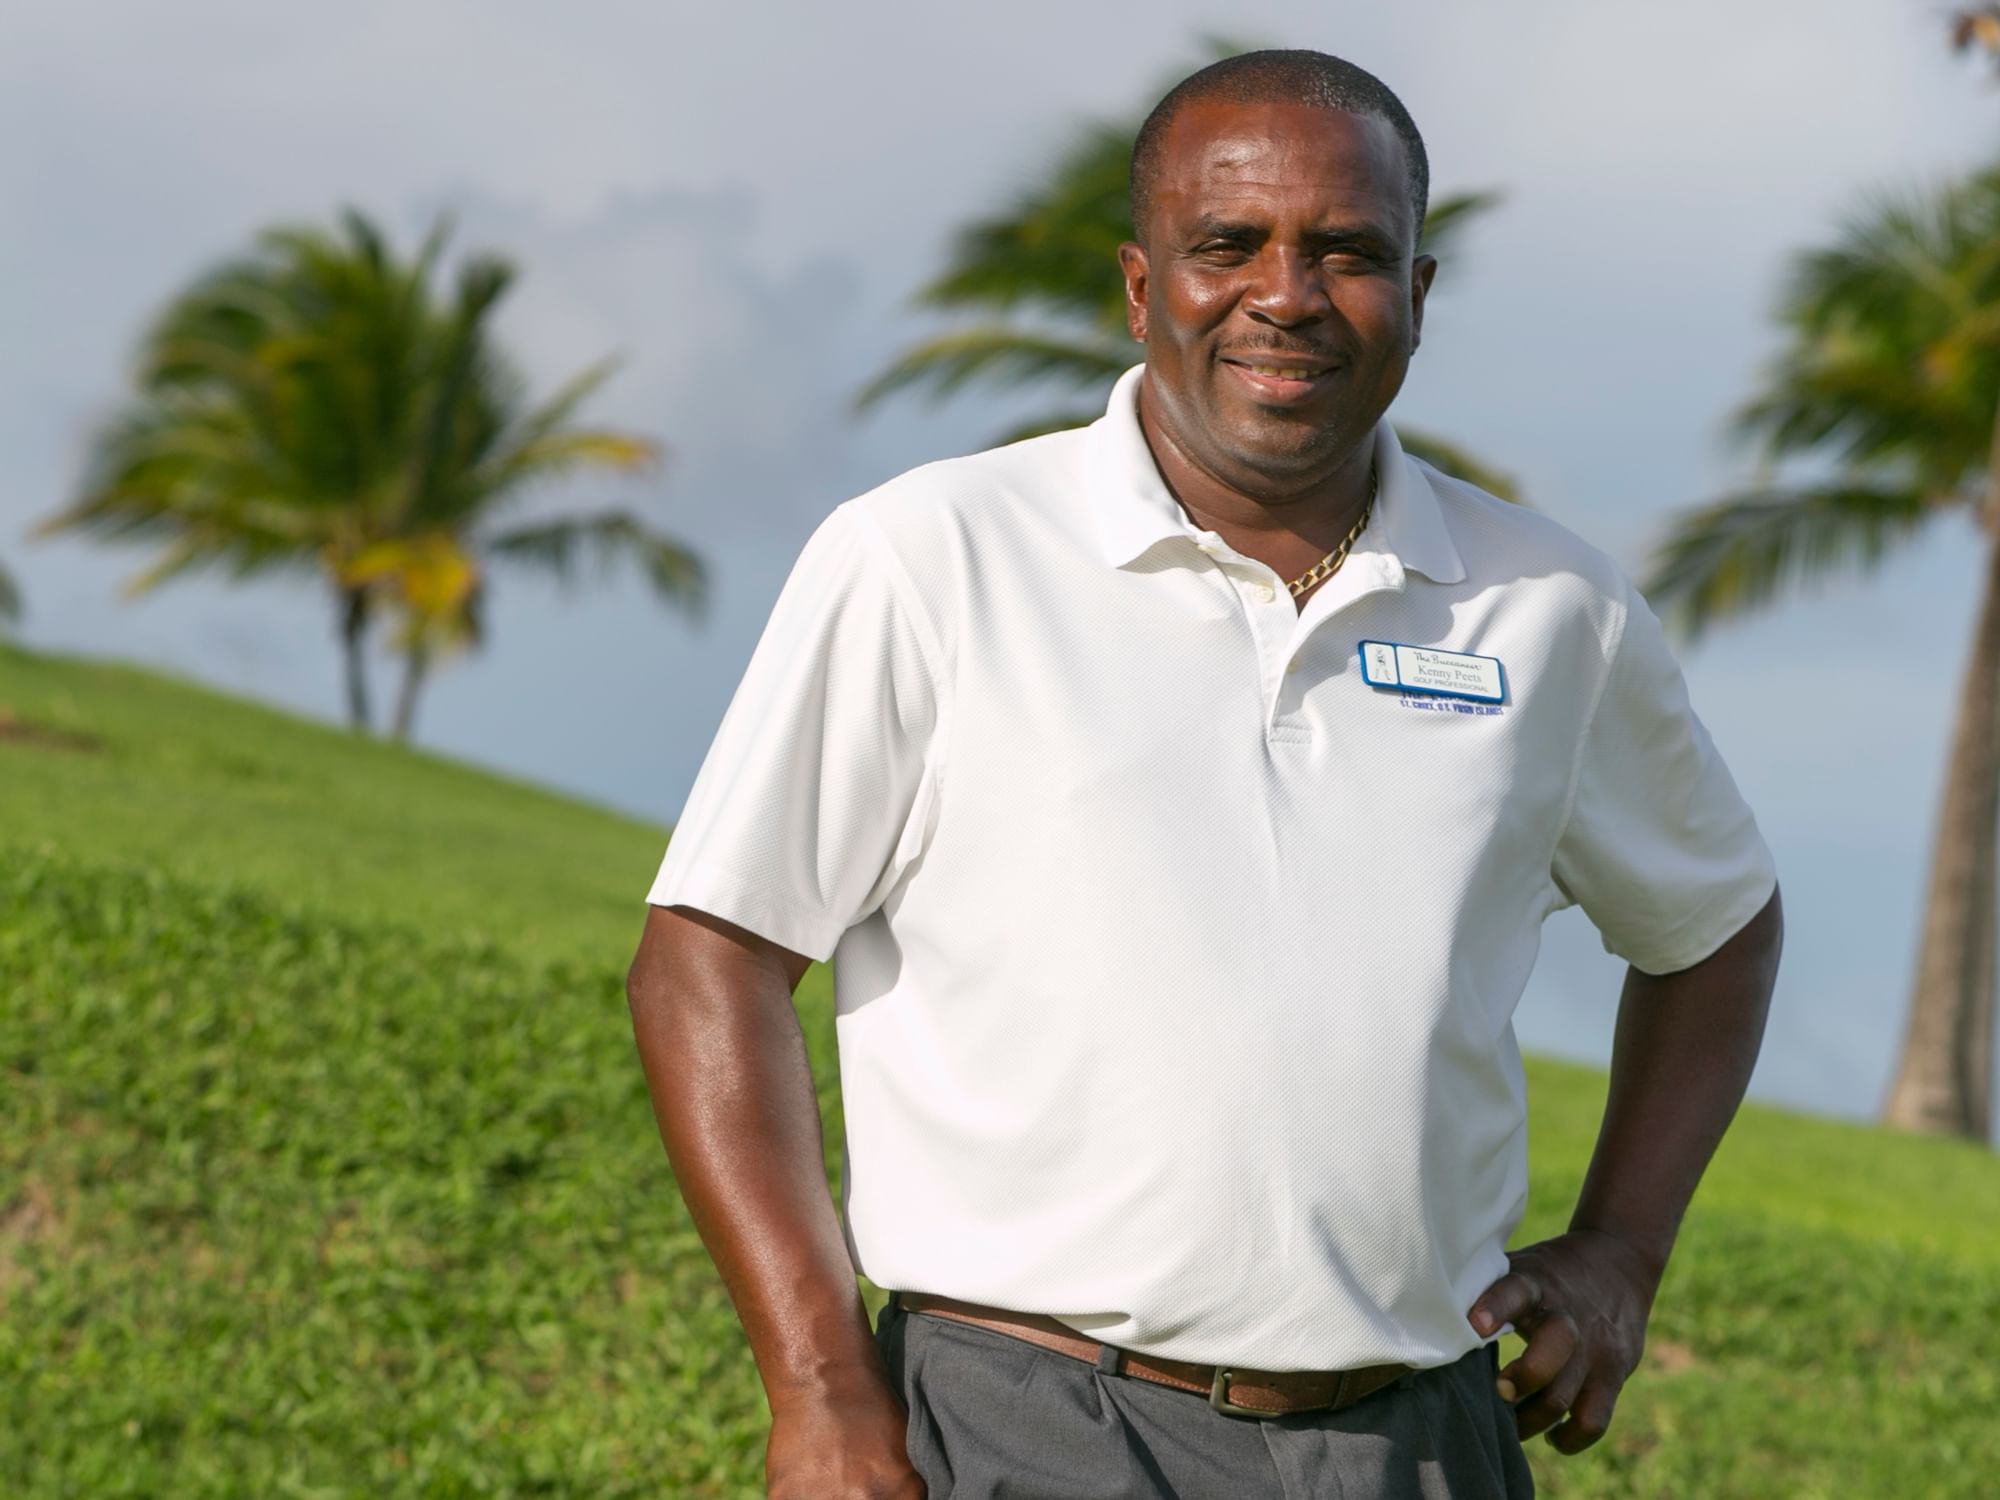 Headshot of a Golf Pro in a course near The Buccaneer Resort St. Croix